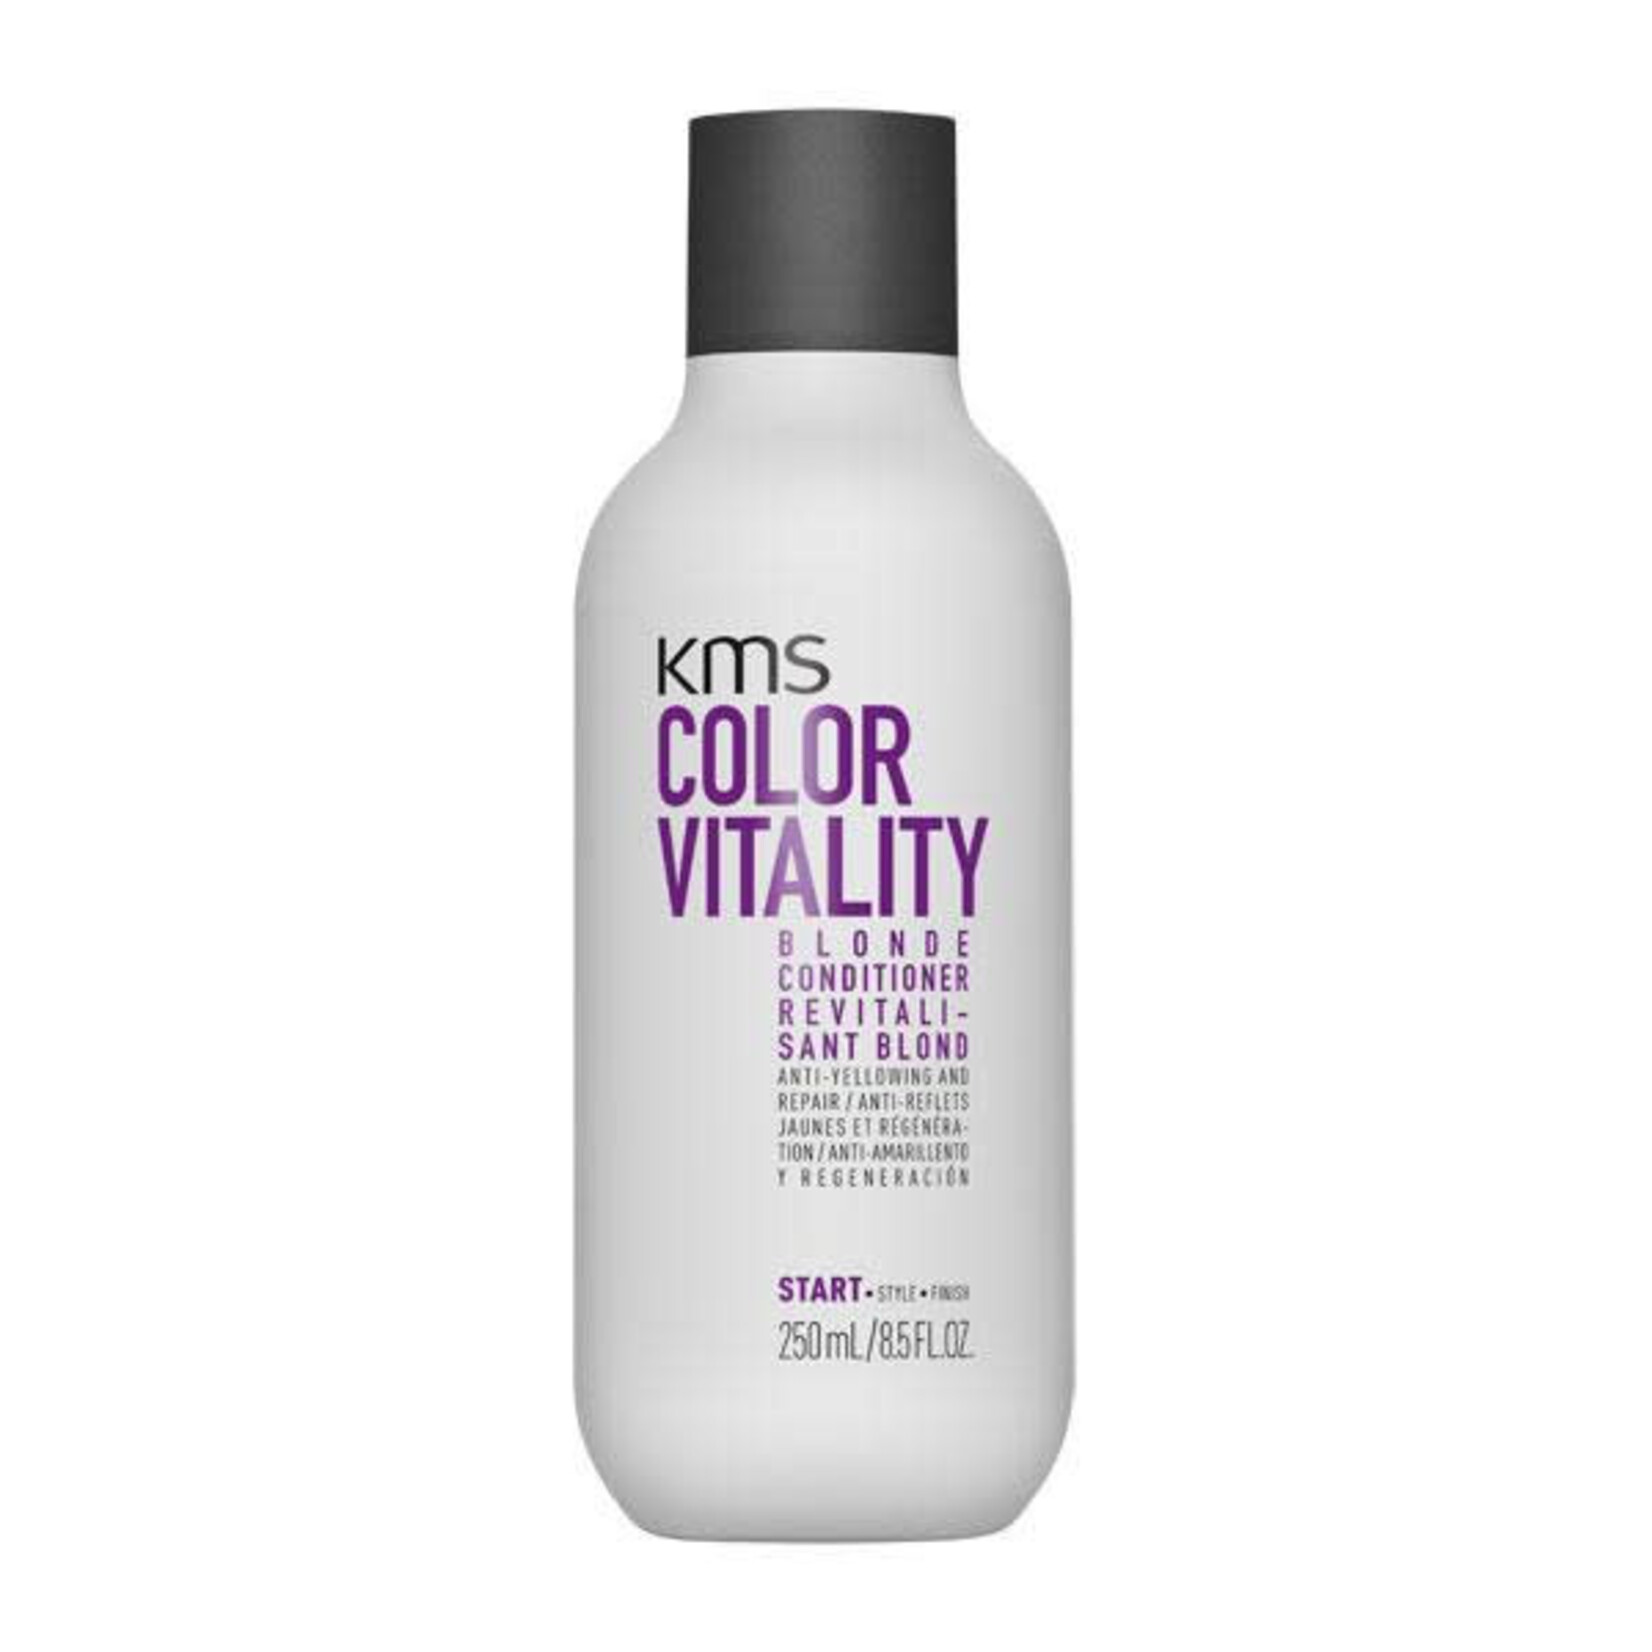 KMS KMS - Colorvitality - Blonde Conditioner 250ml